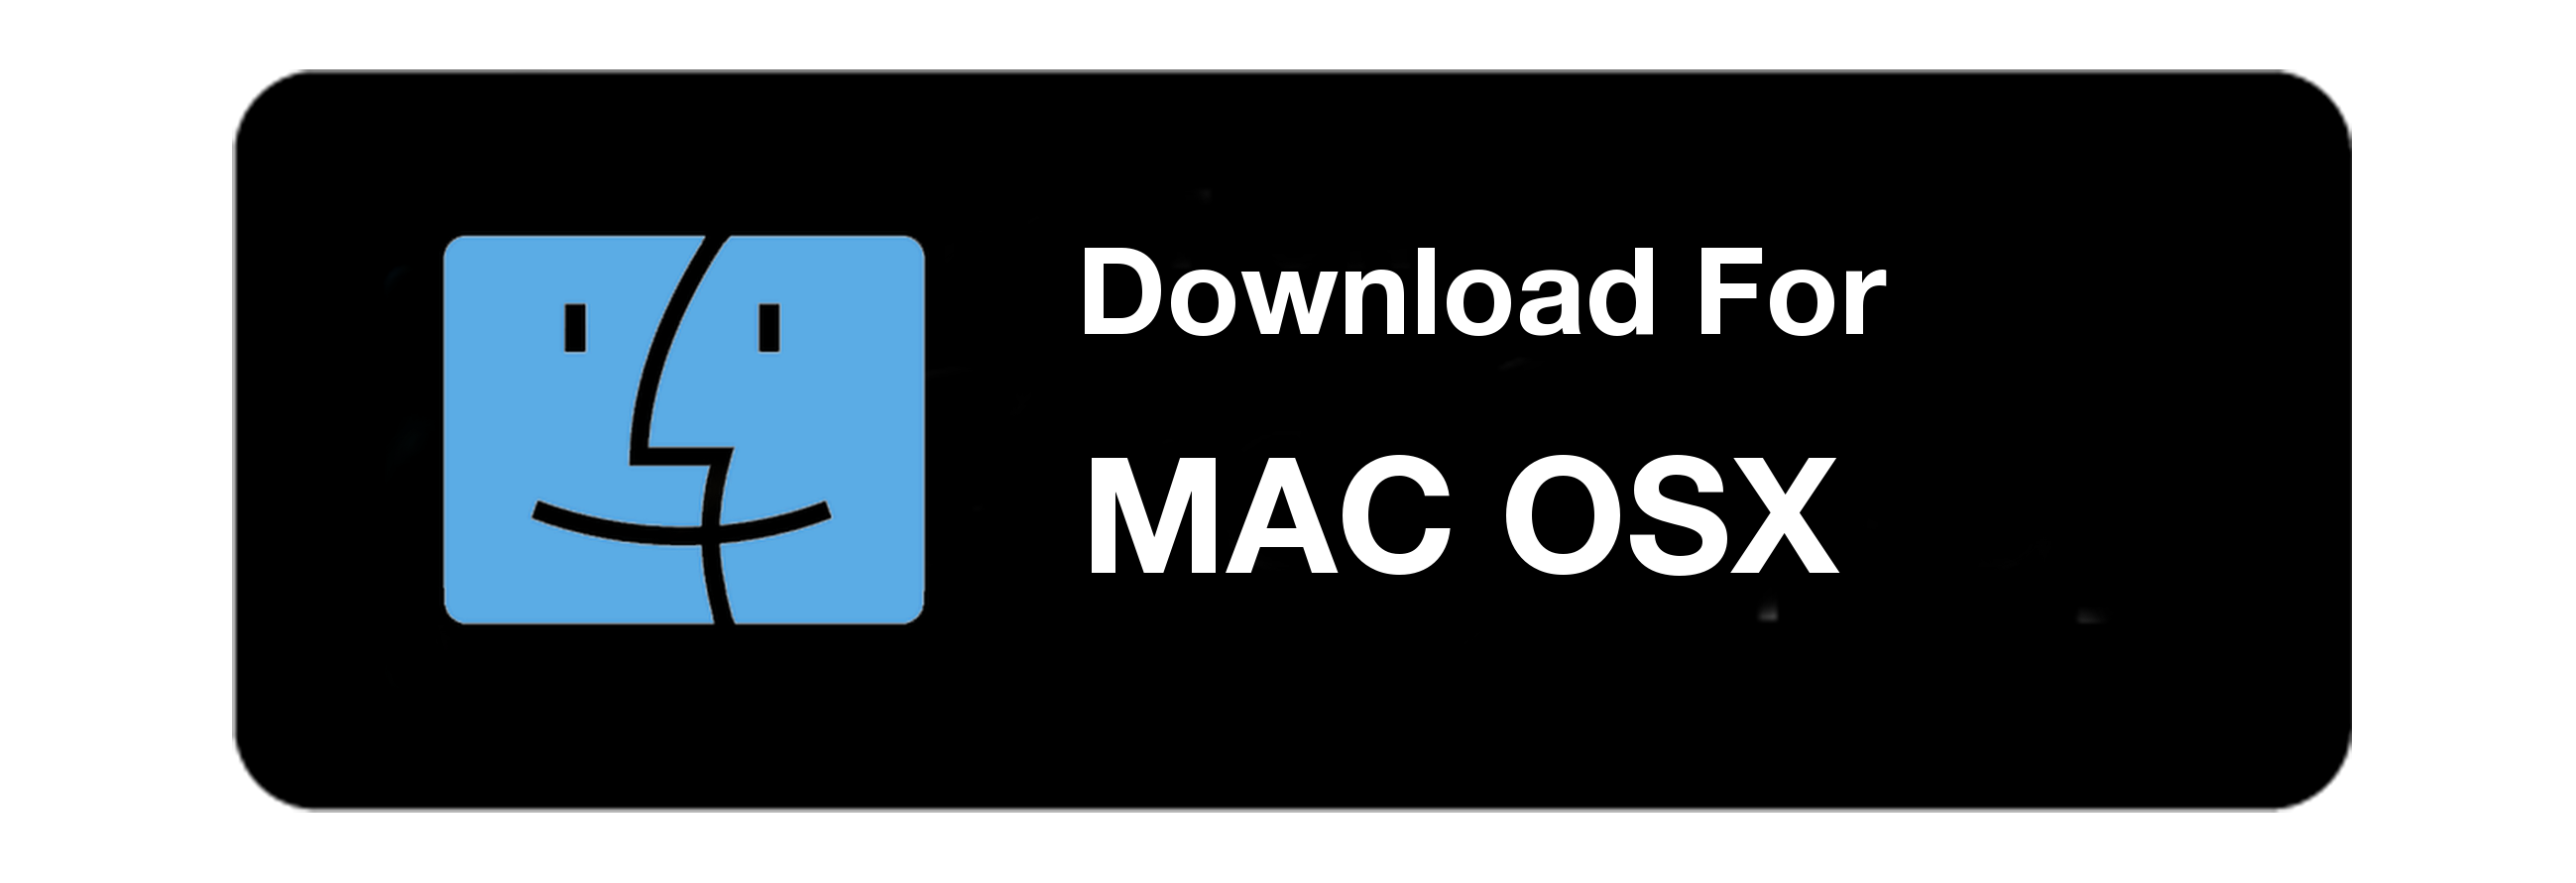 download for mac